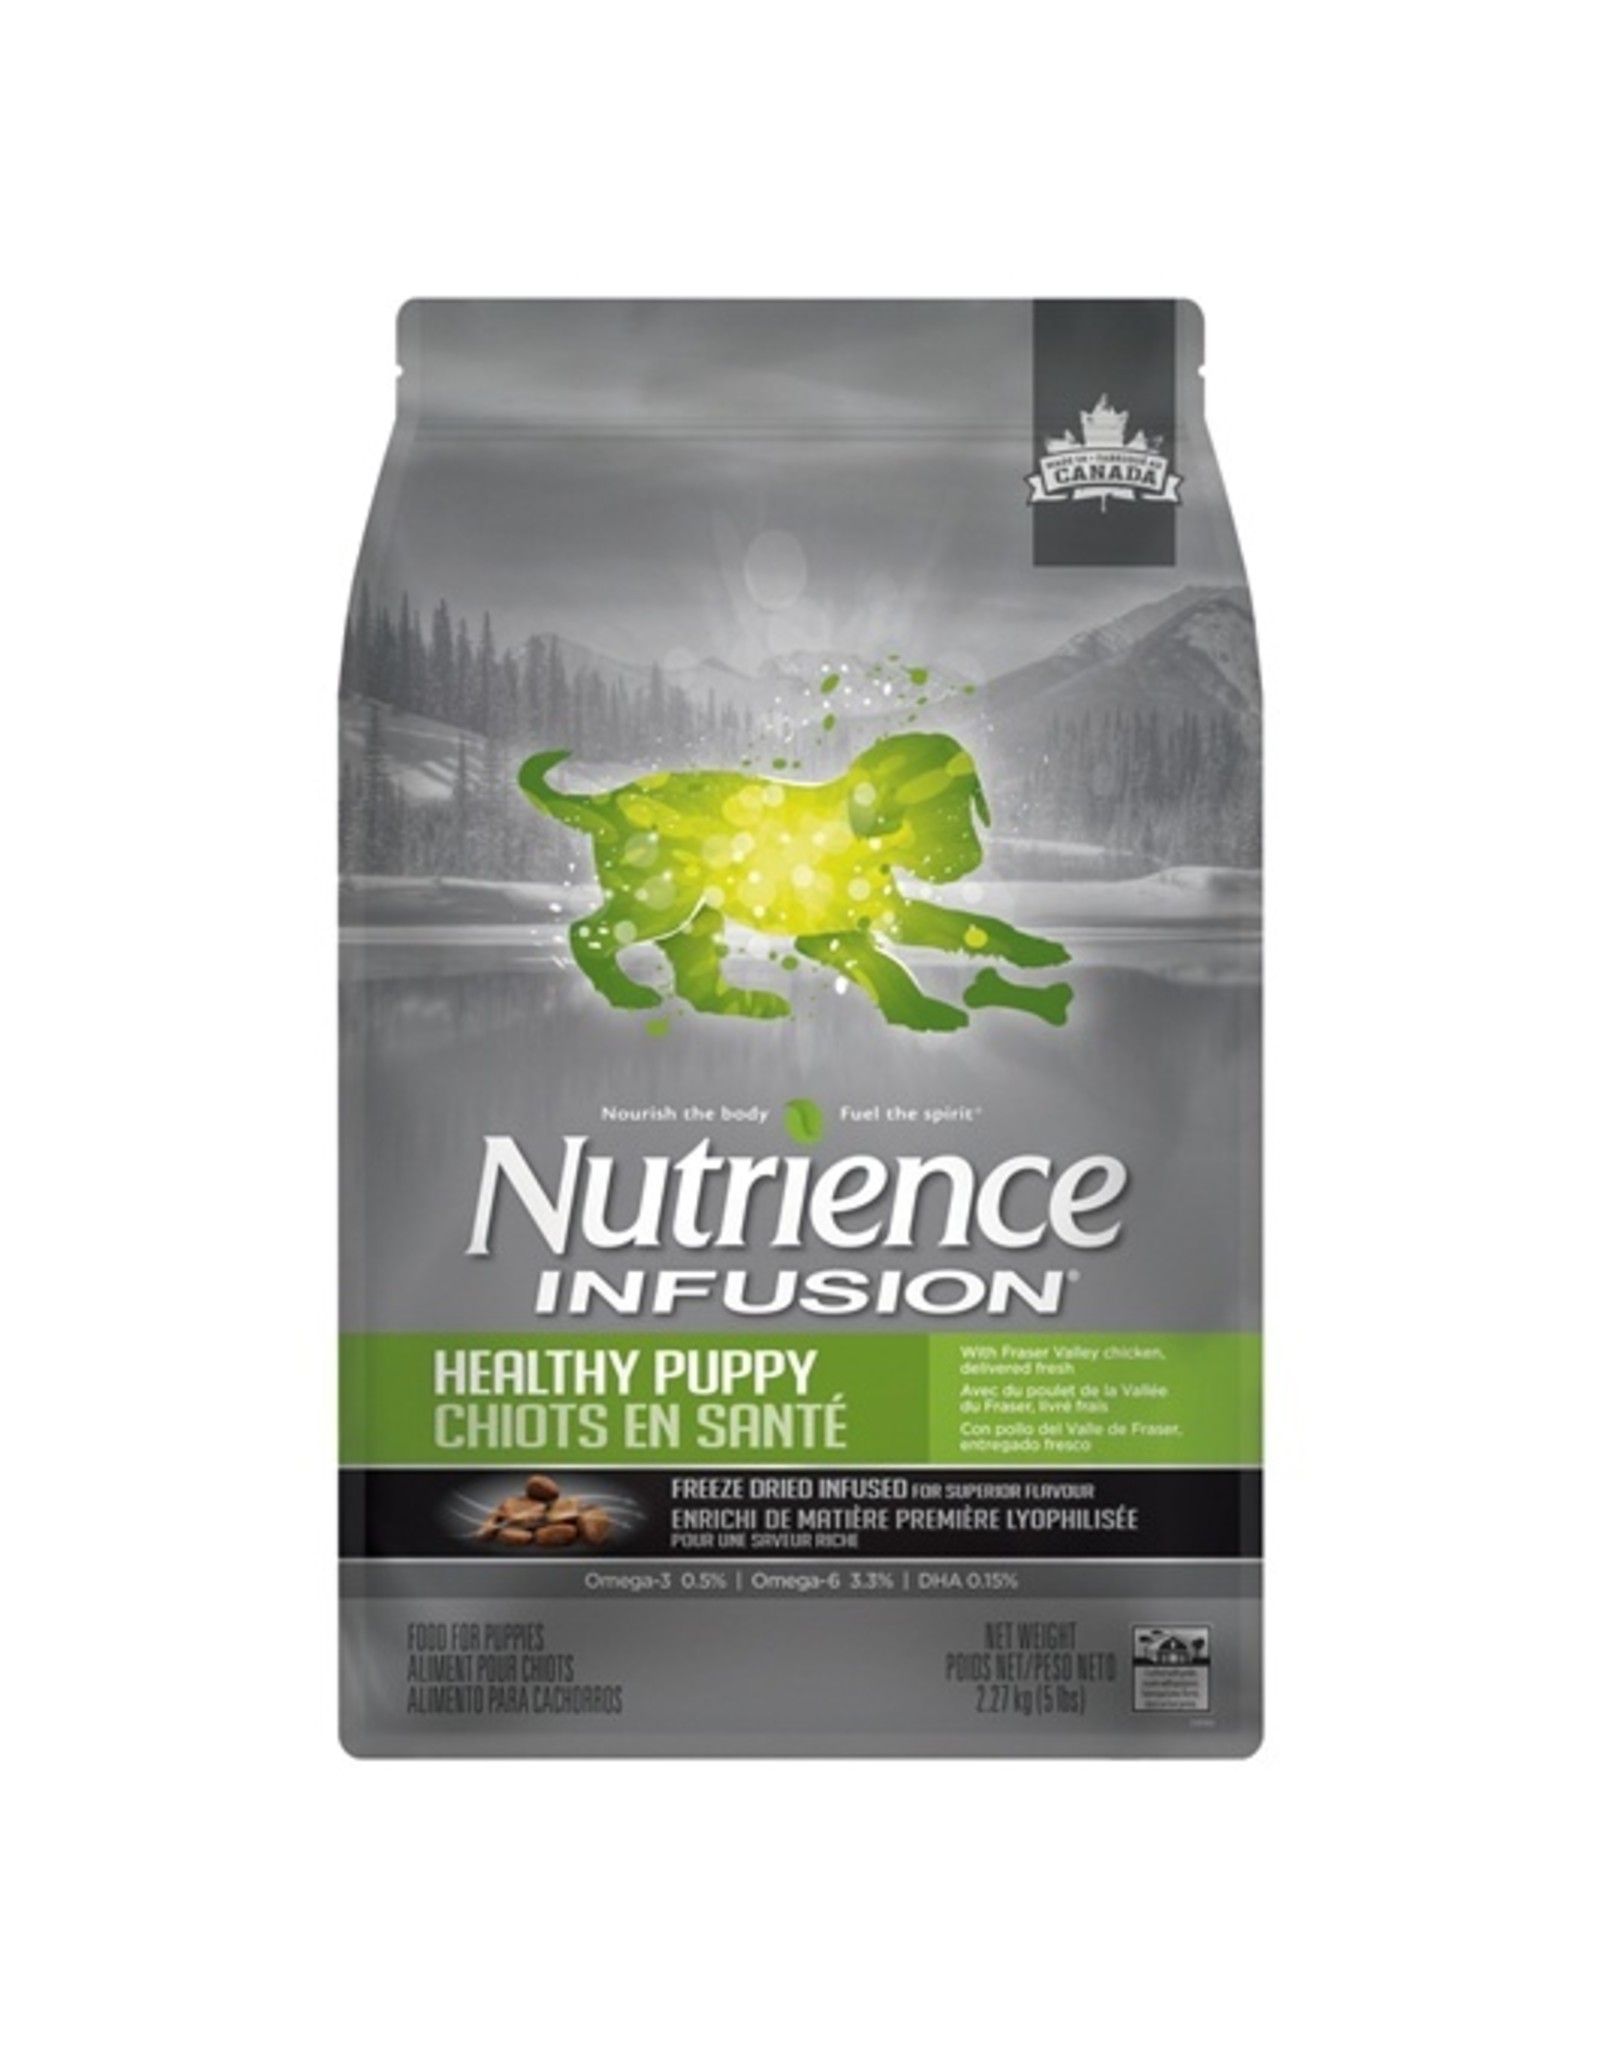 Nutrience Infusion Puppy 2.27 kg (5 lbs) - Western Pet Supply